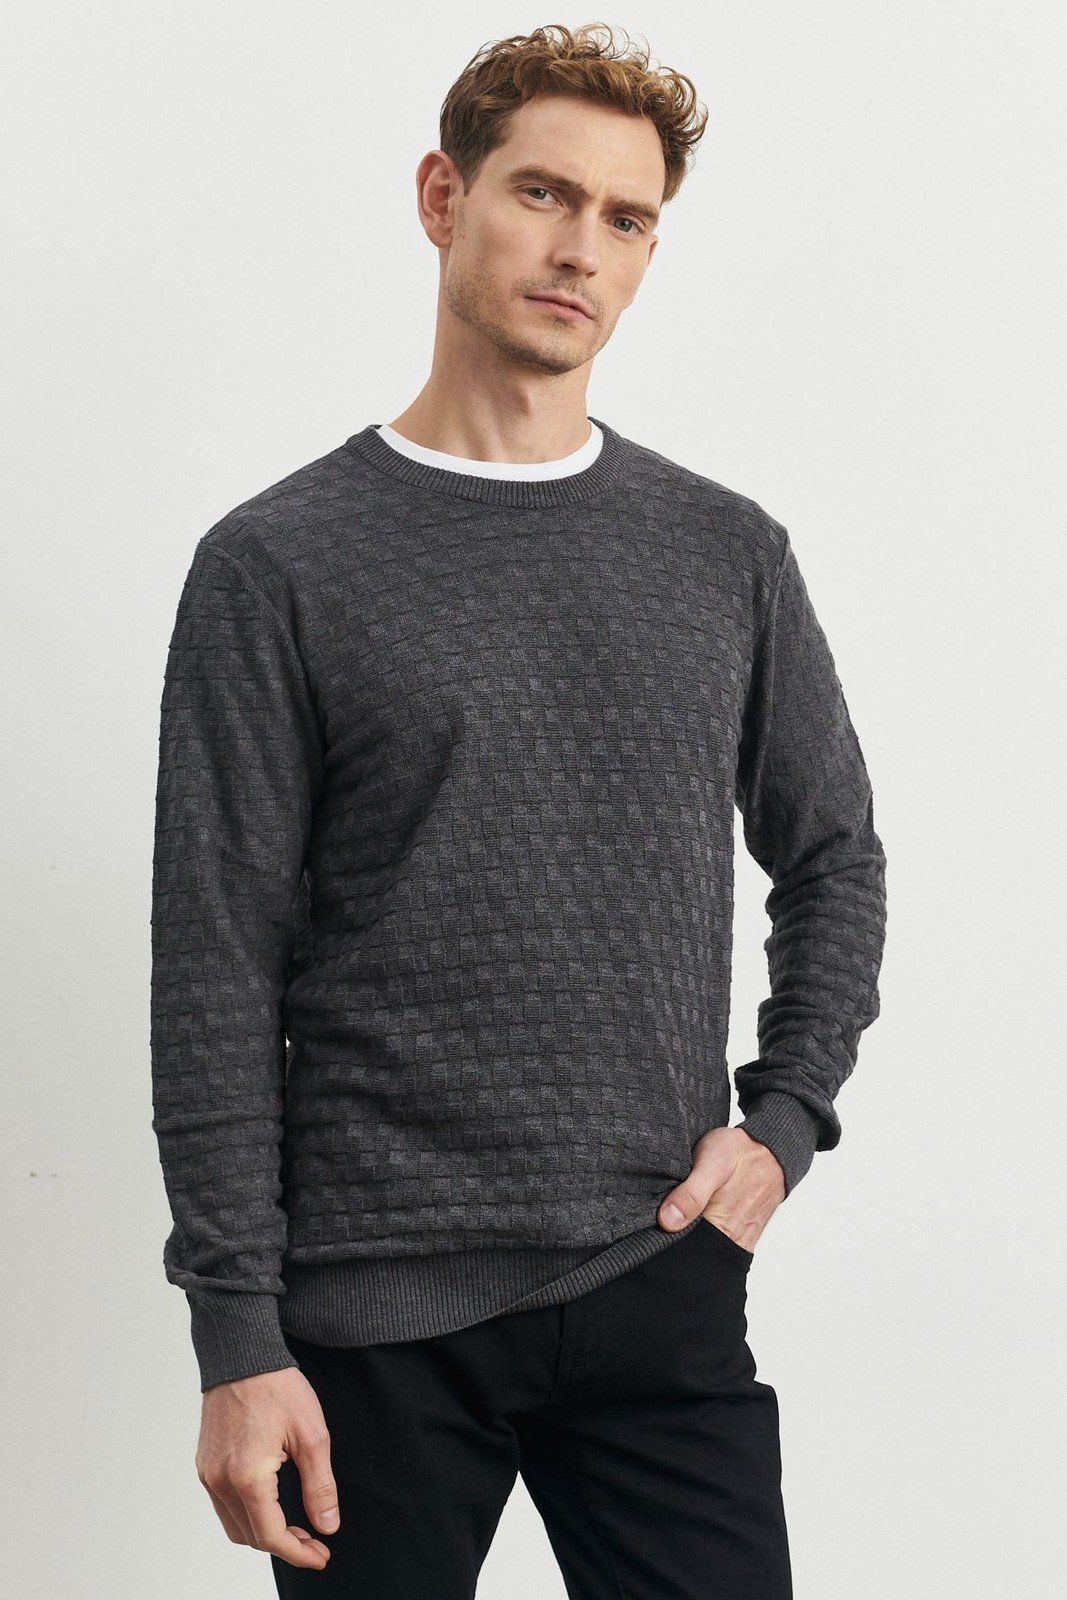 ALTINYILDIZ CLASSICS Men's Anthracite Standard Fit Normal Cut, Bicycle Collar Patterned Knitwear Sweater.